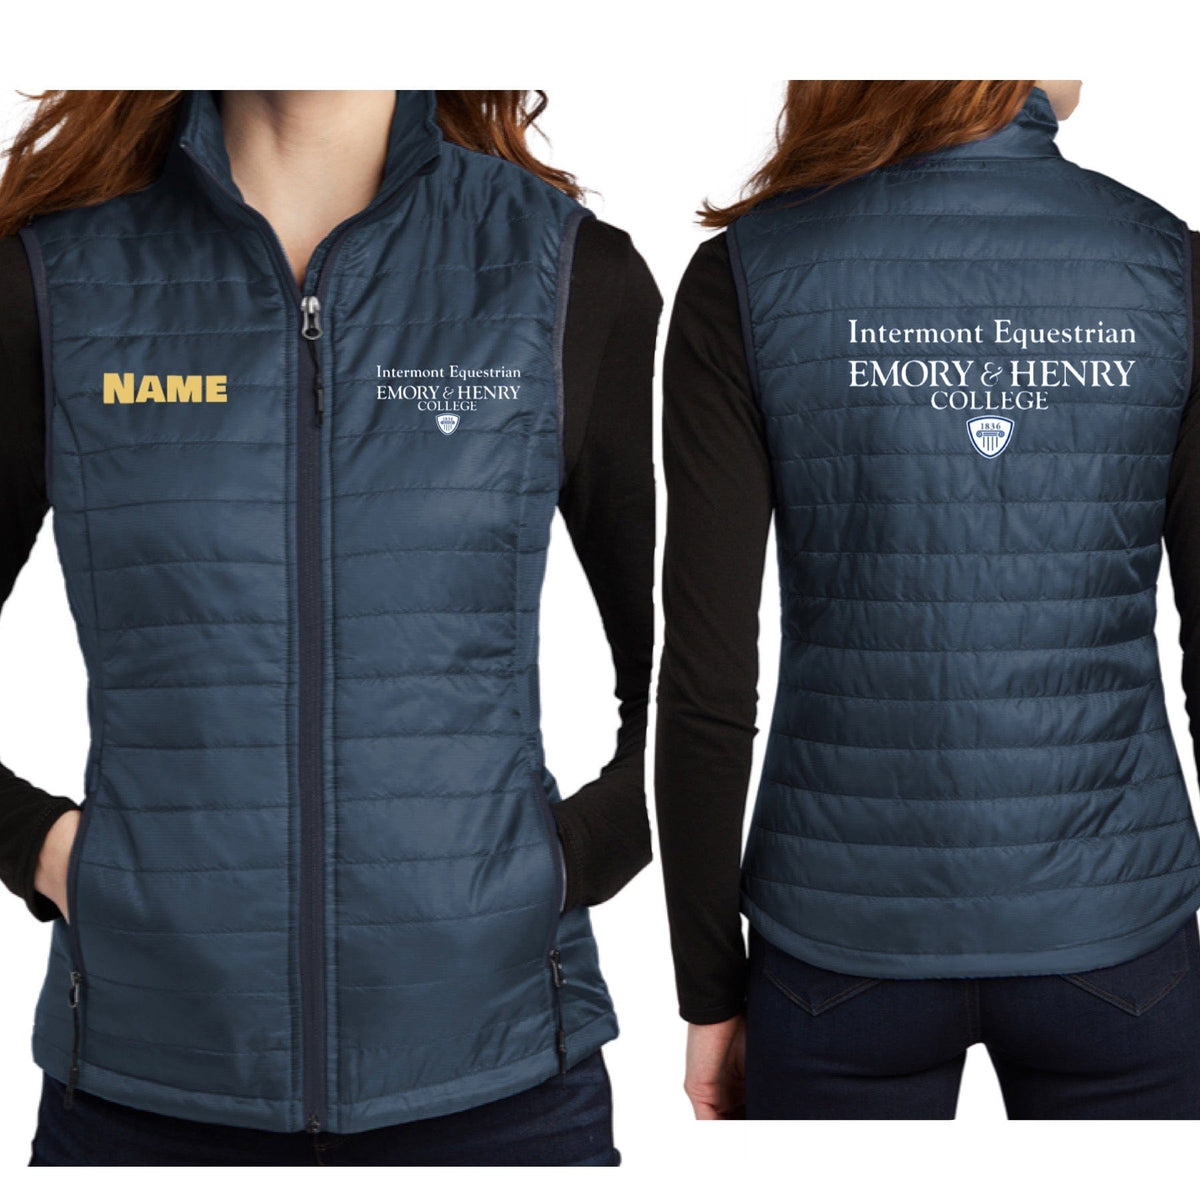 Equestrian Team Apparel Emory & Henry Puffy Jacket and Vest equestrian team apparel online tack store mobile tack store custom farm apparel custom show stable clothing equestrian lifestyle horse show clothing riding clothes horses equestrian tack store